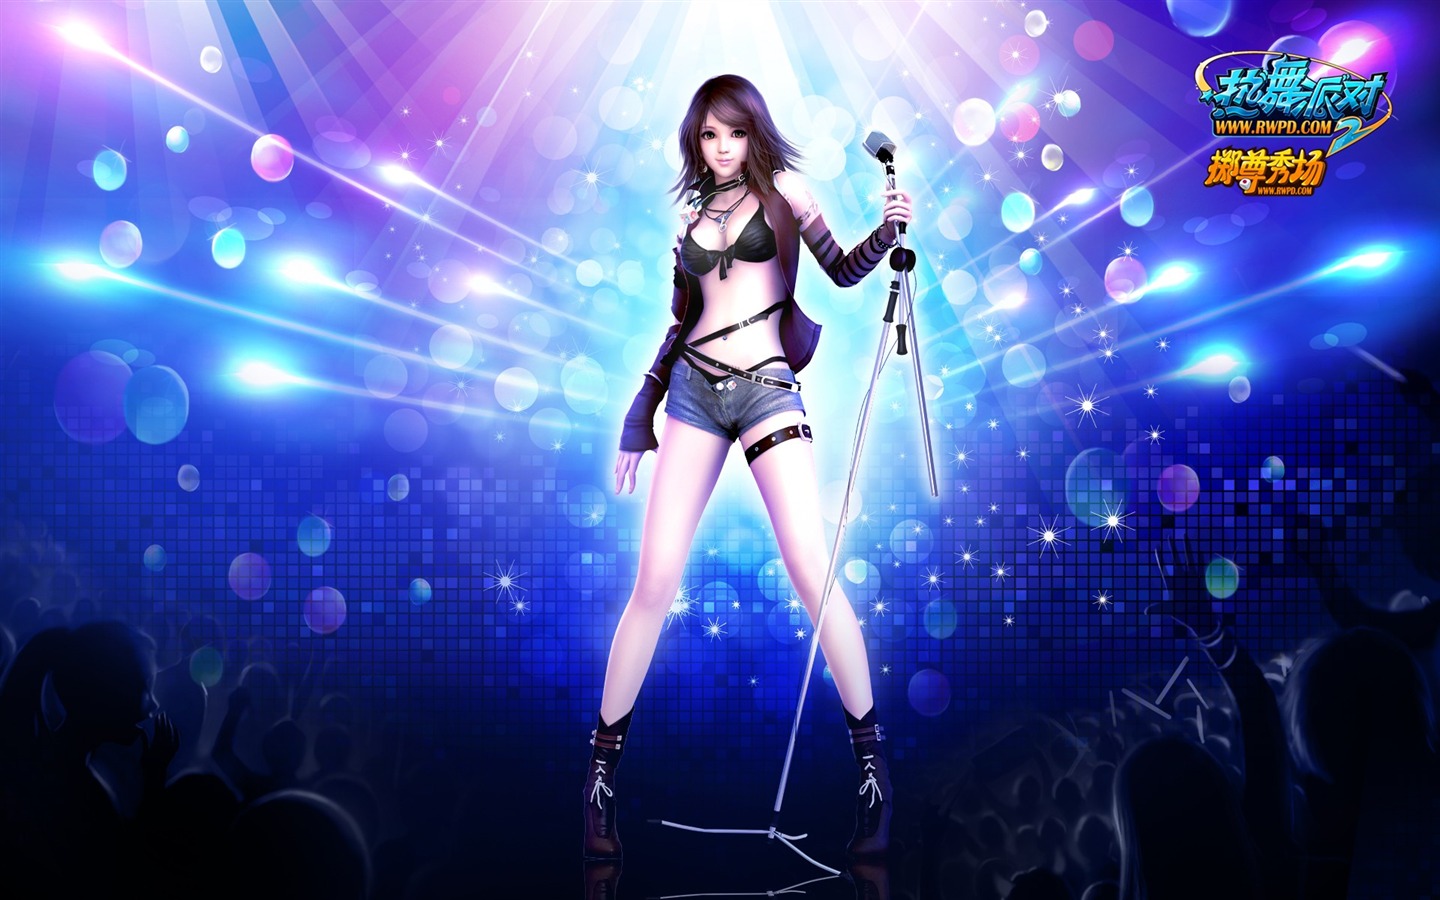 Online game Hot Dance Party II official wallpapers #39 - 1440x900